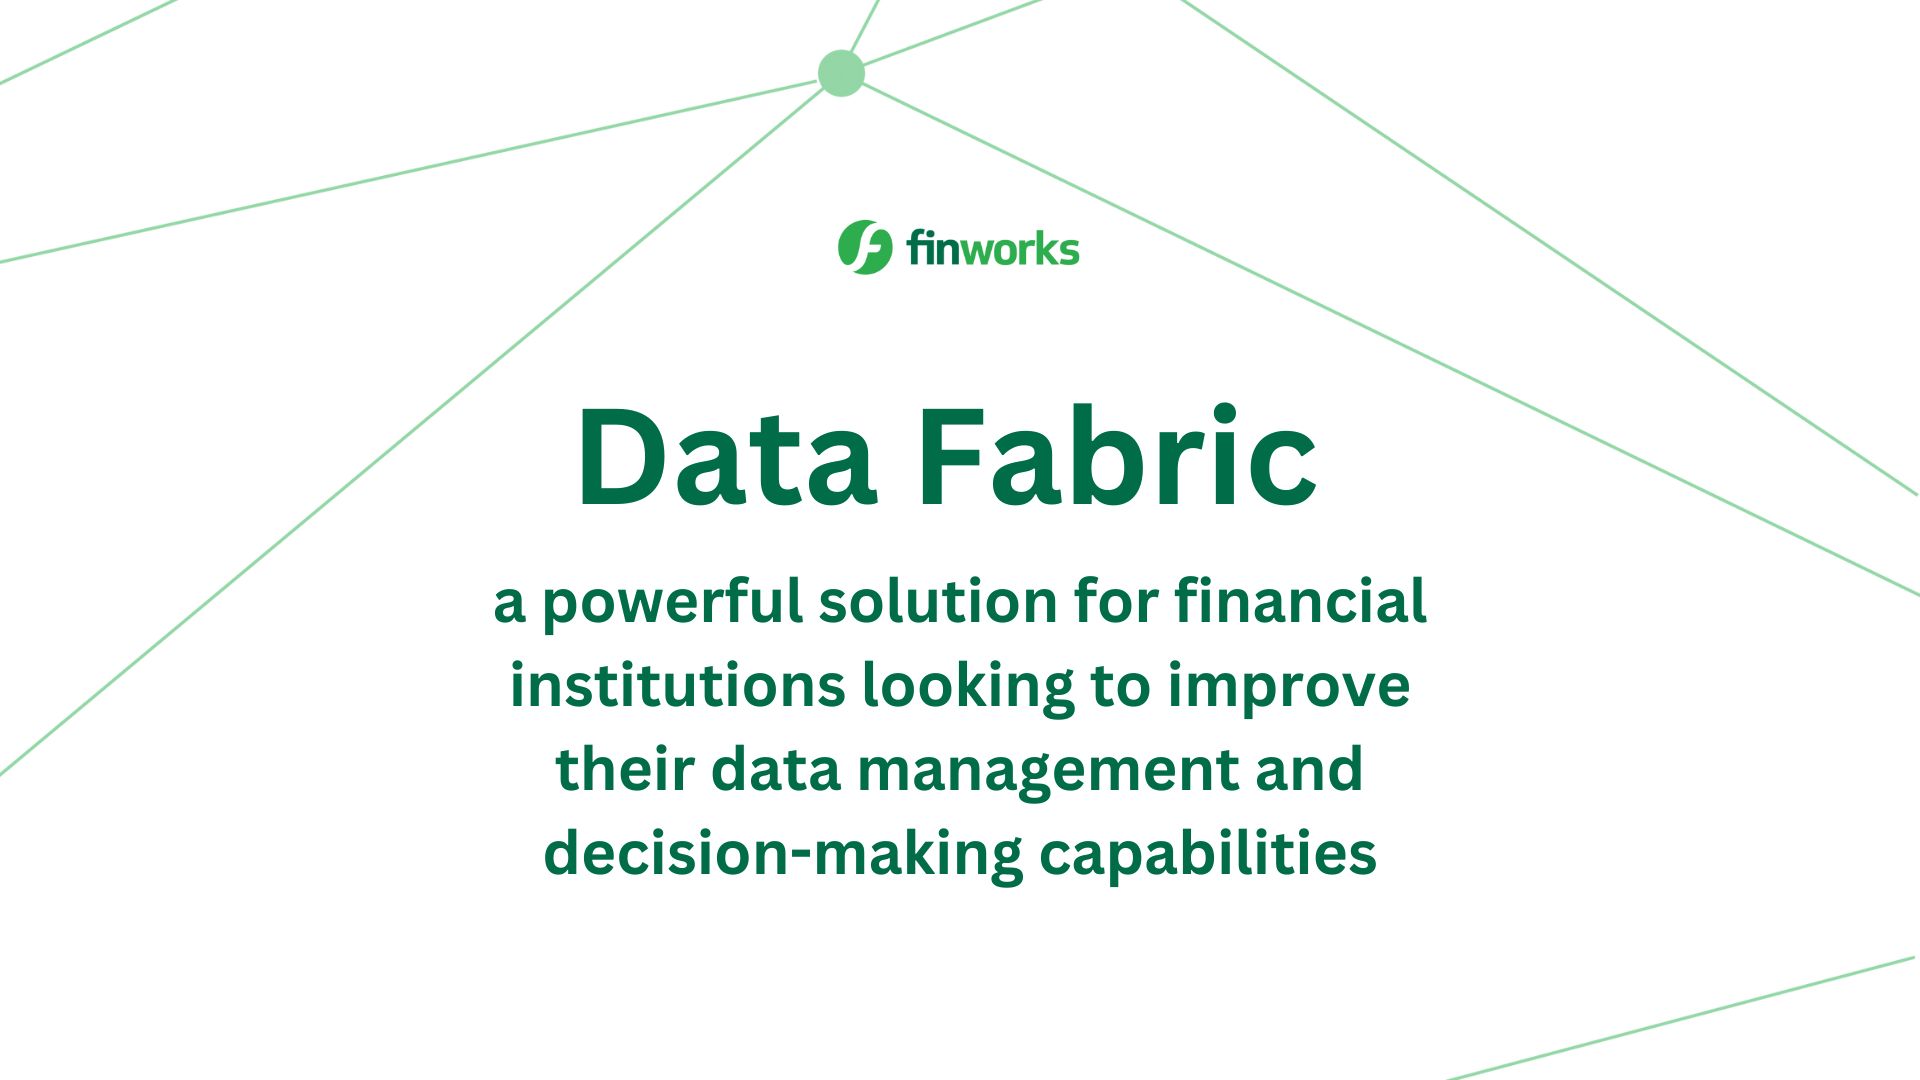 Data Fabric a powerful solution for financial institutions looking to improve their data management and decision-making capabilities